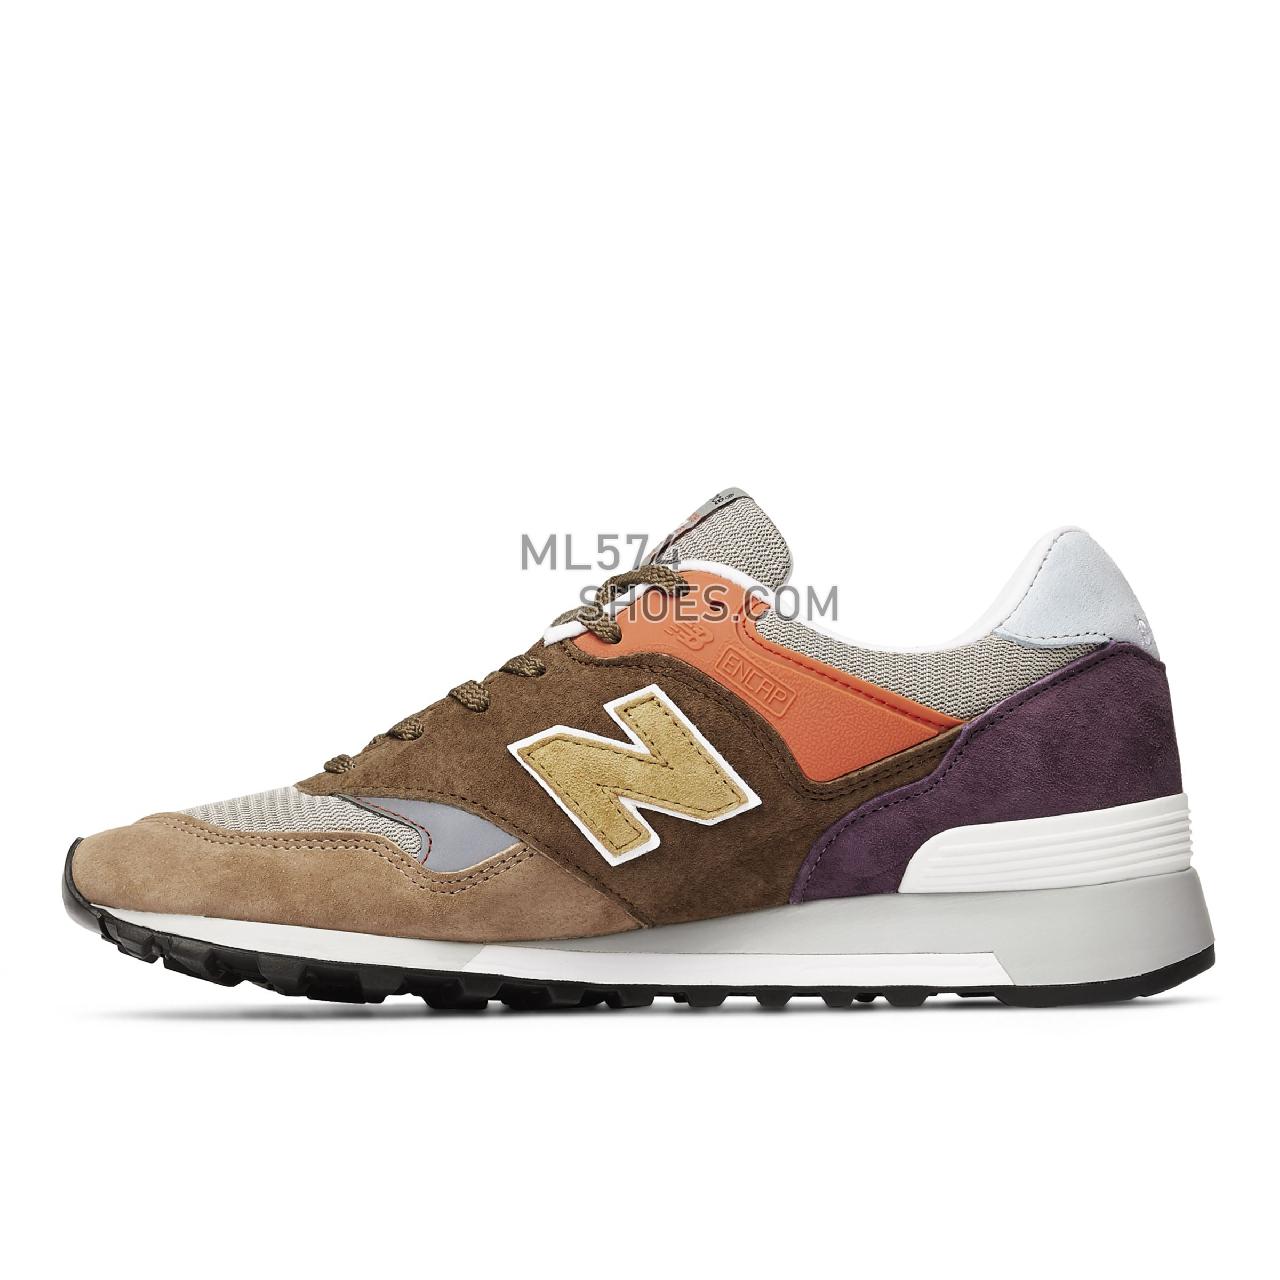 New Balance Made in UK 577 - Men's Made in USA And UK Sneakers - Sand with grey and salmon - M577DS